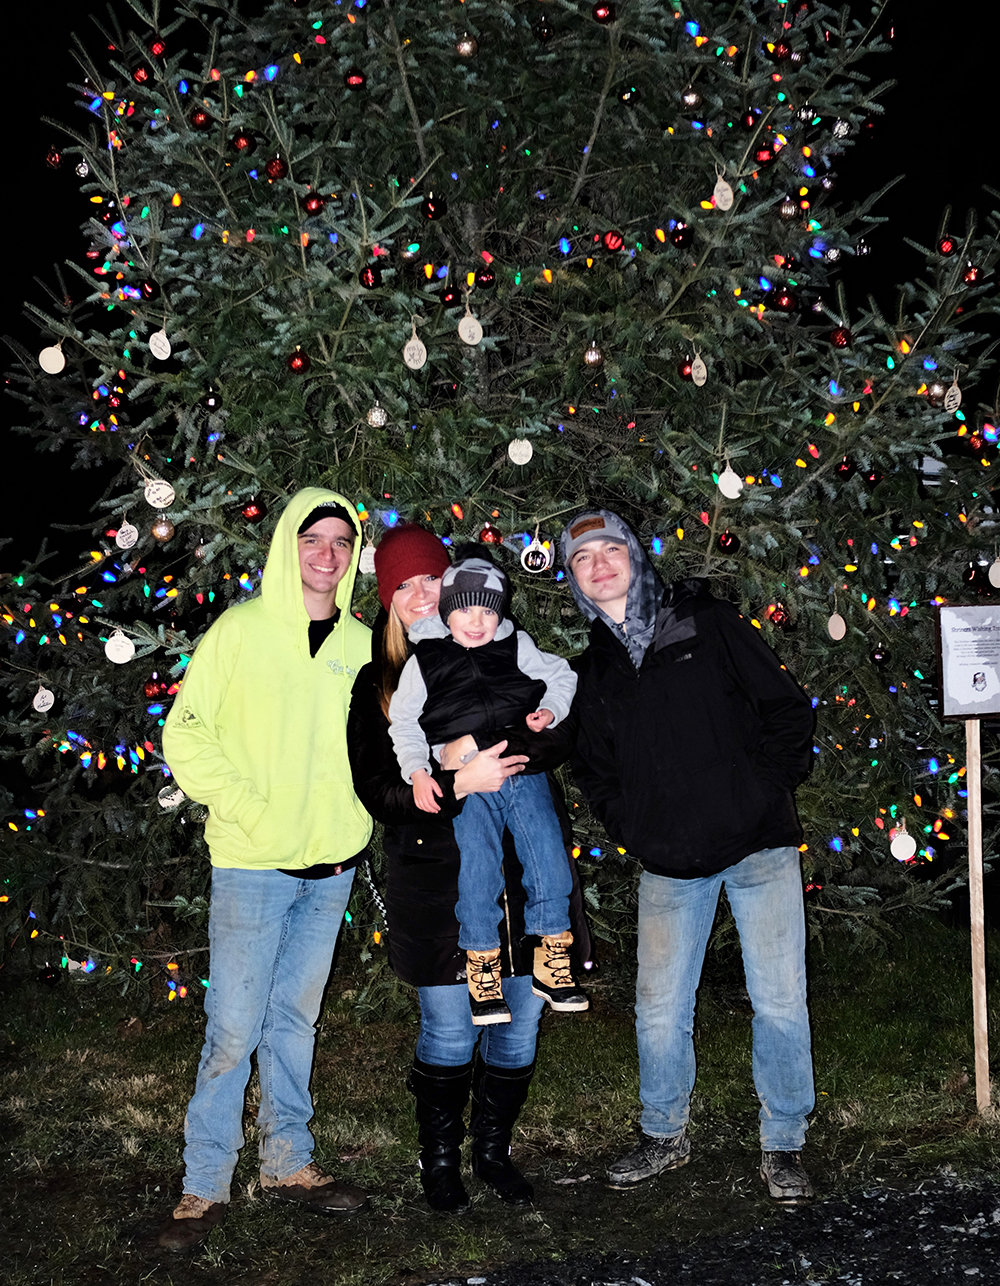 The Zambito family came out for the tree lighting. L-R Tyler, Kristin, Ryder and Dylan.